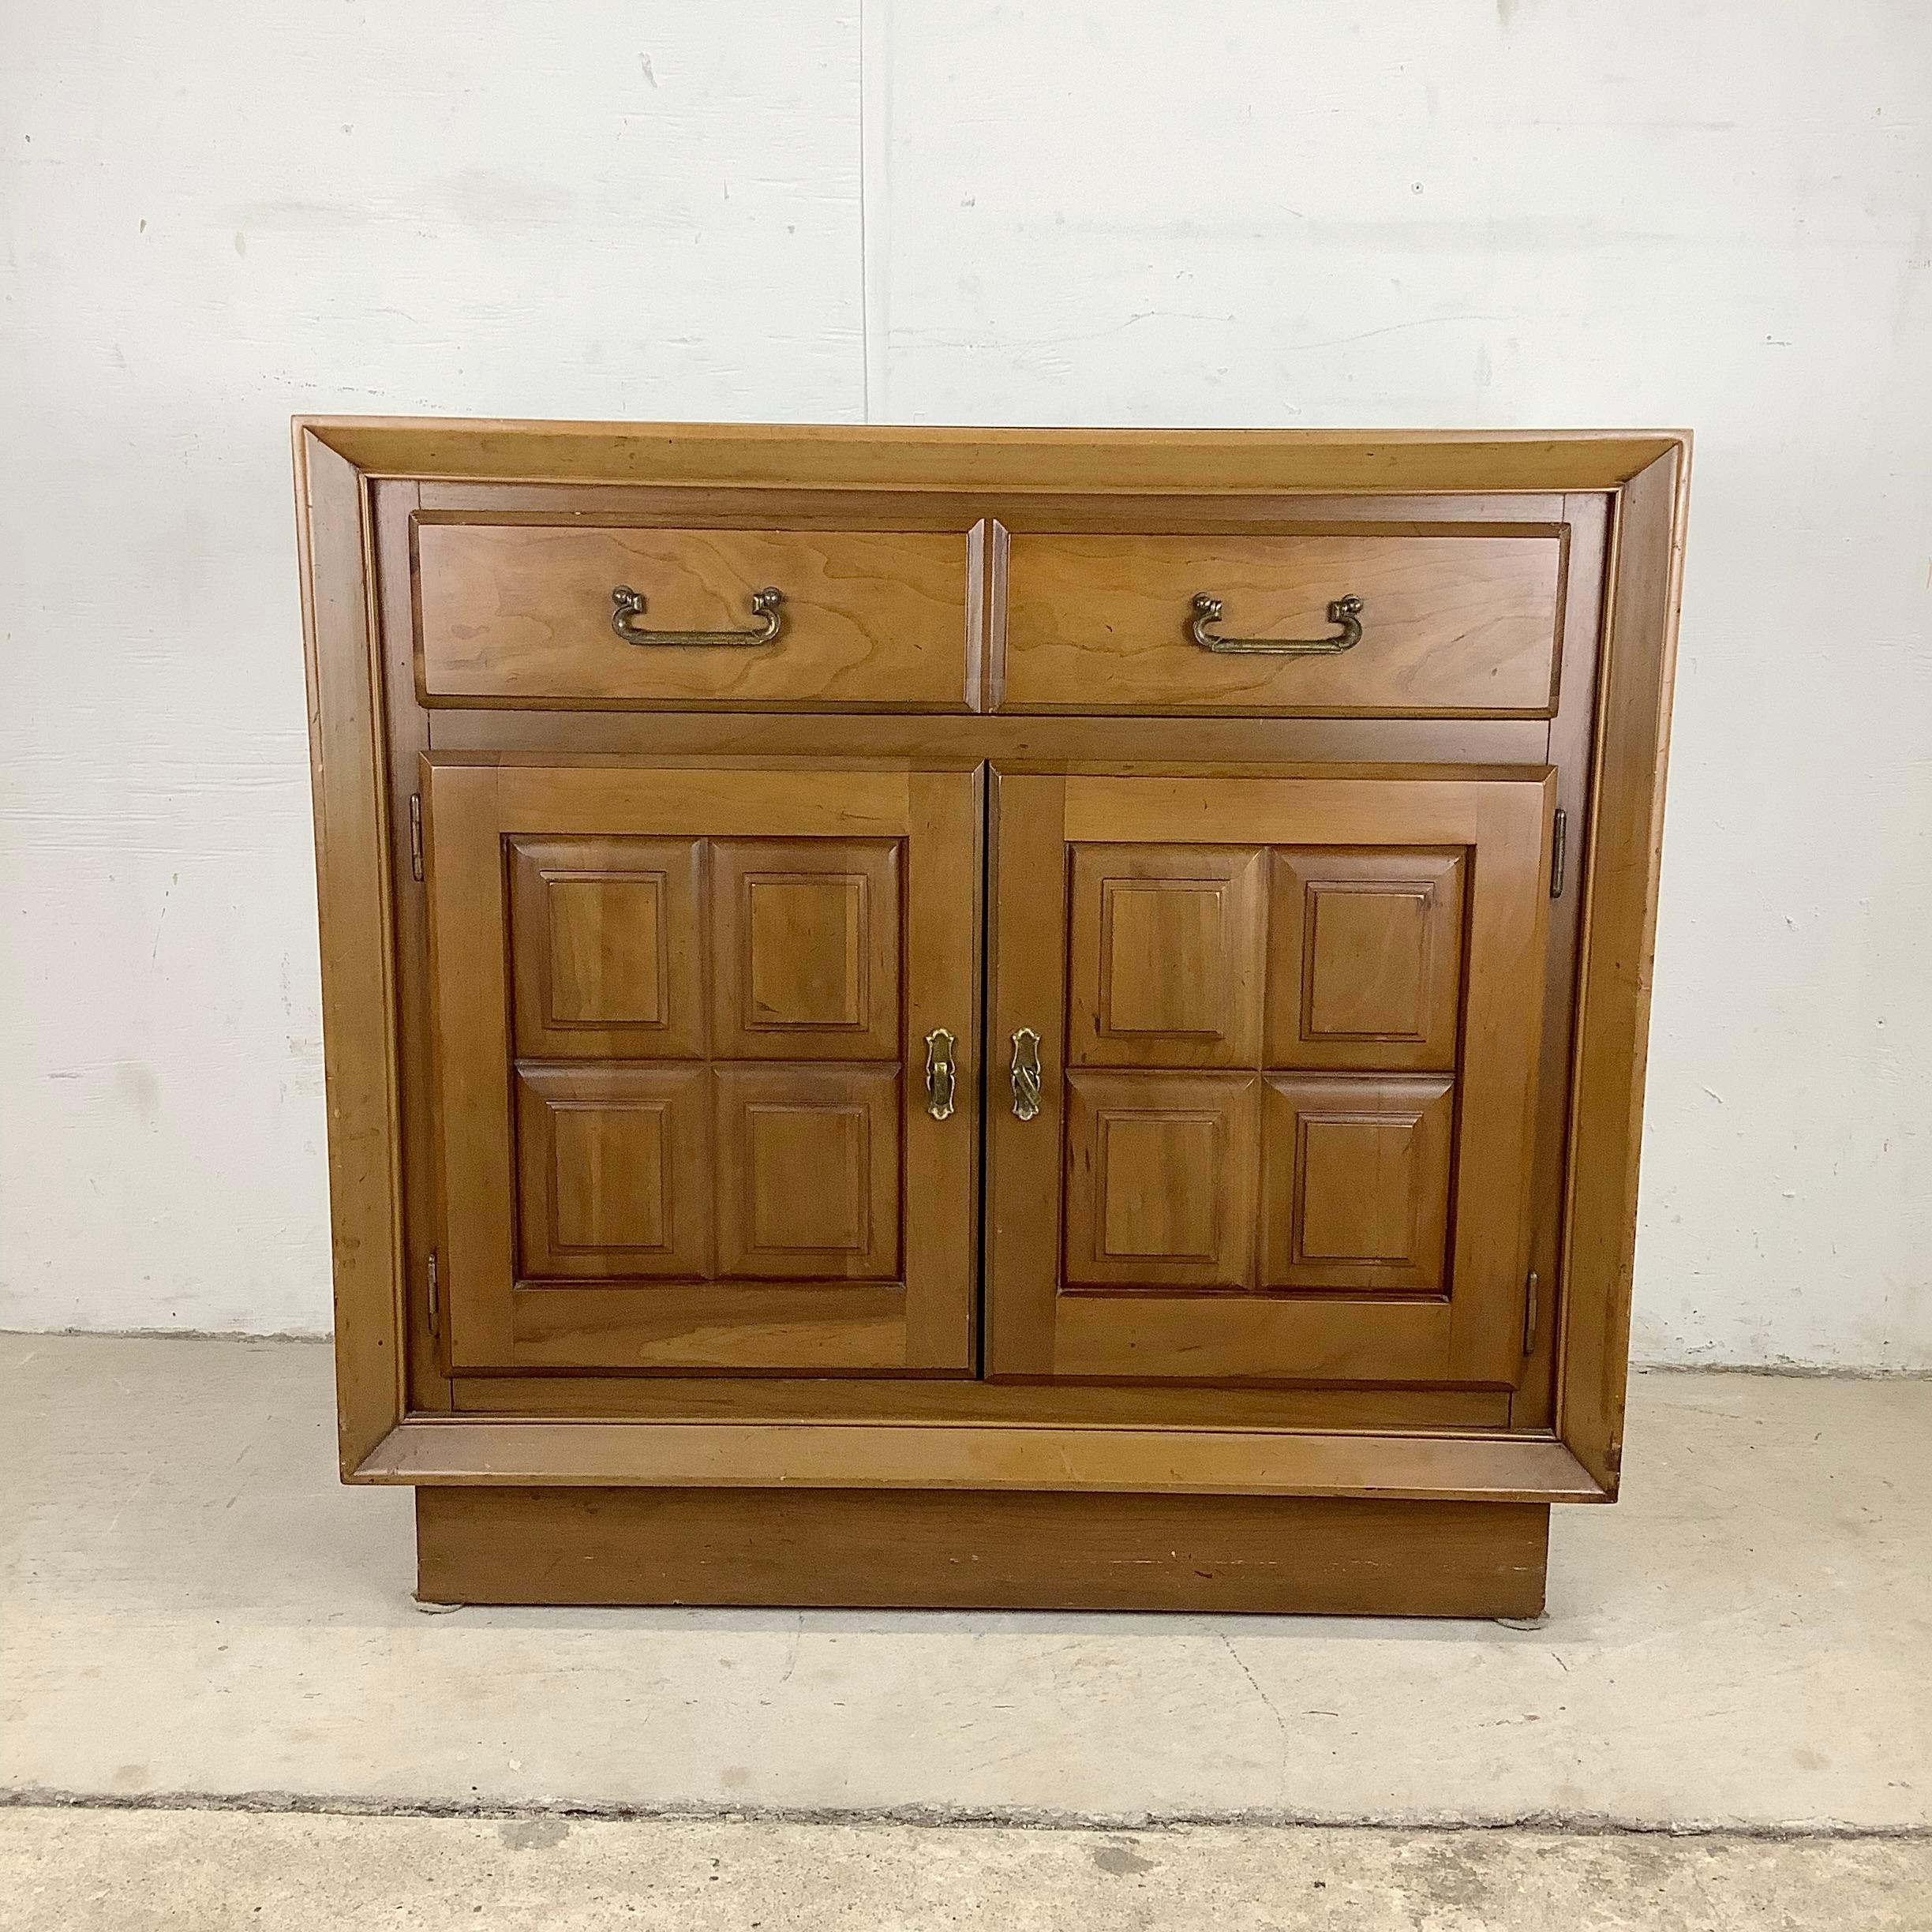 This vintage walnut storage cabinet is a testament to quality midcentury craftsmanship and offers both functionality and beauty to enhance your living space.

Created by United Furniture, this cabinet showcases exquisite design and attention to